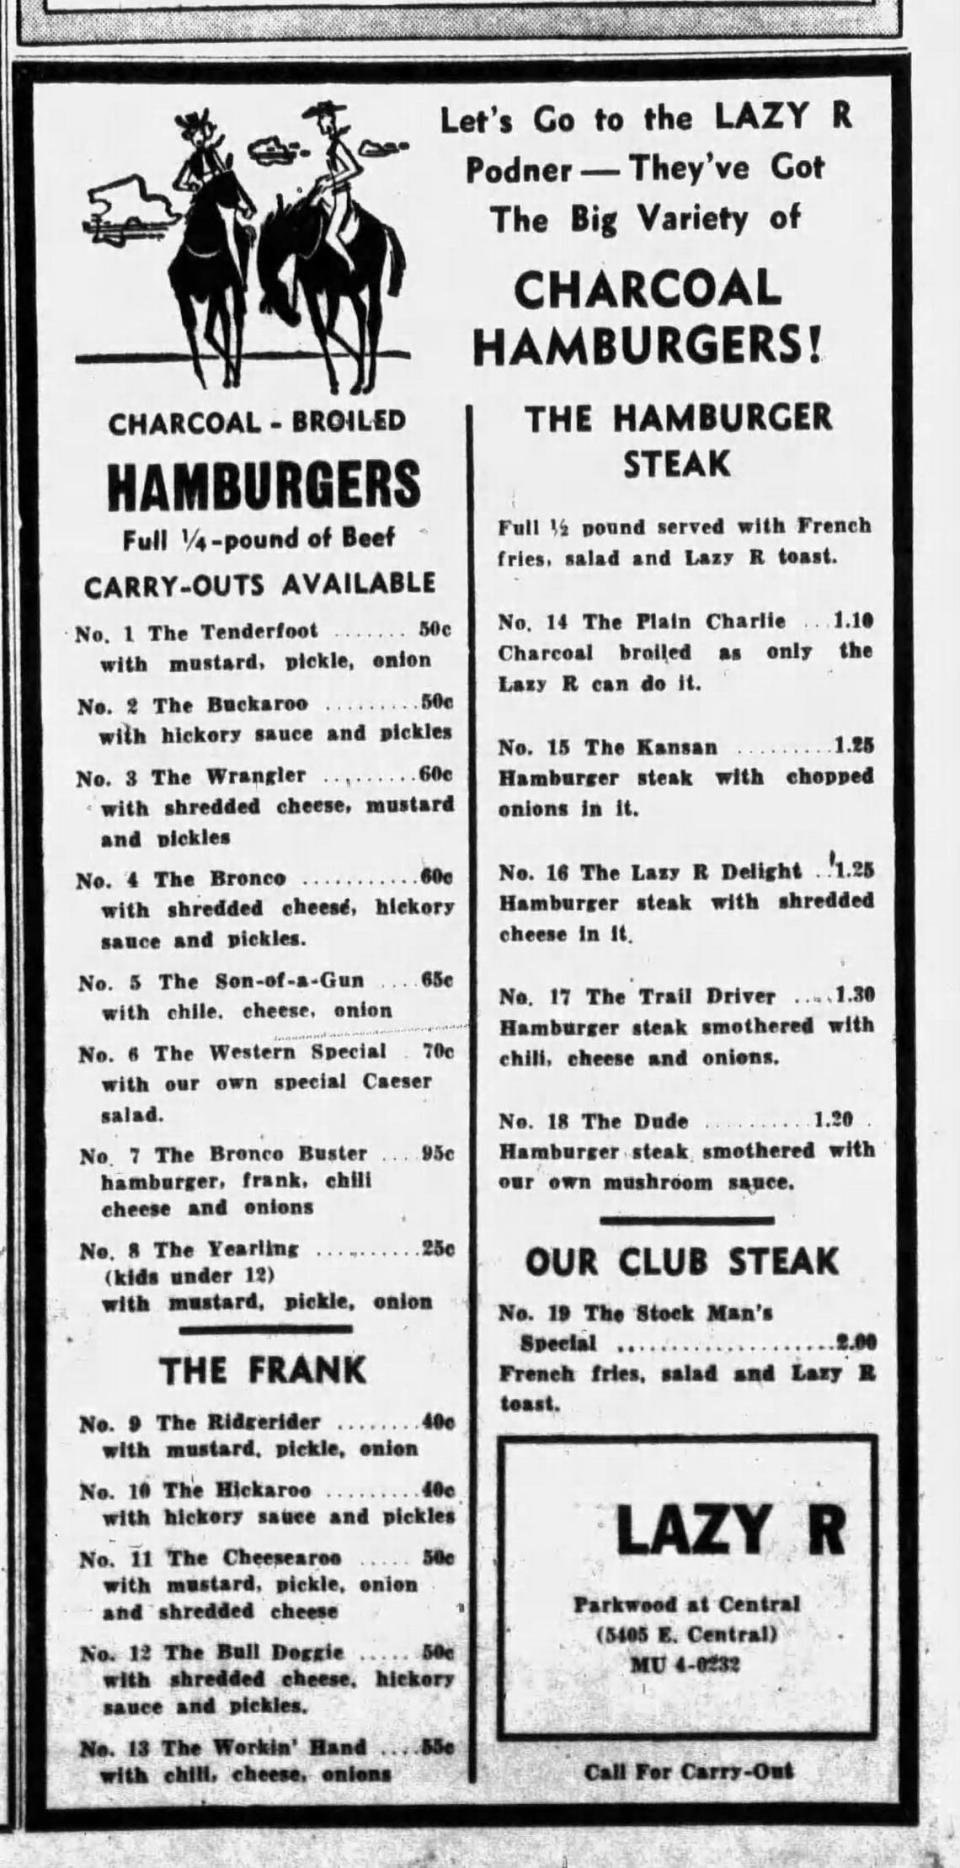 Lazy R’s menu when the first restaurants opened in 1963